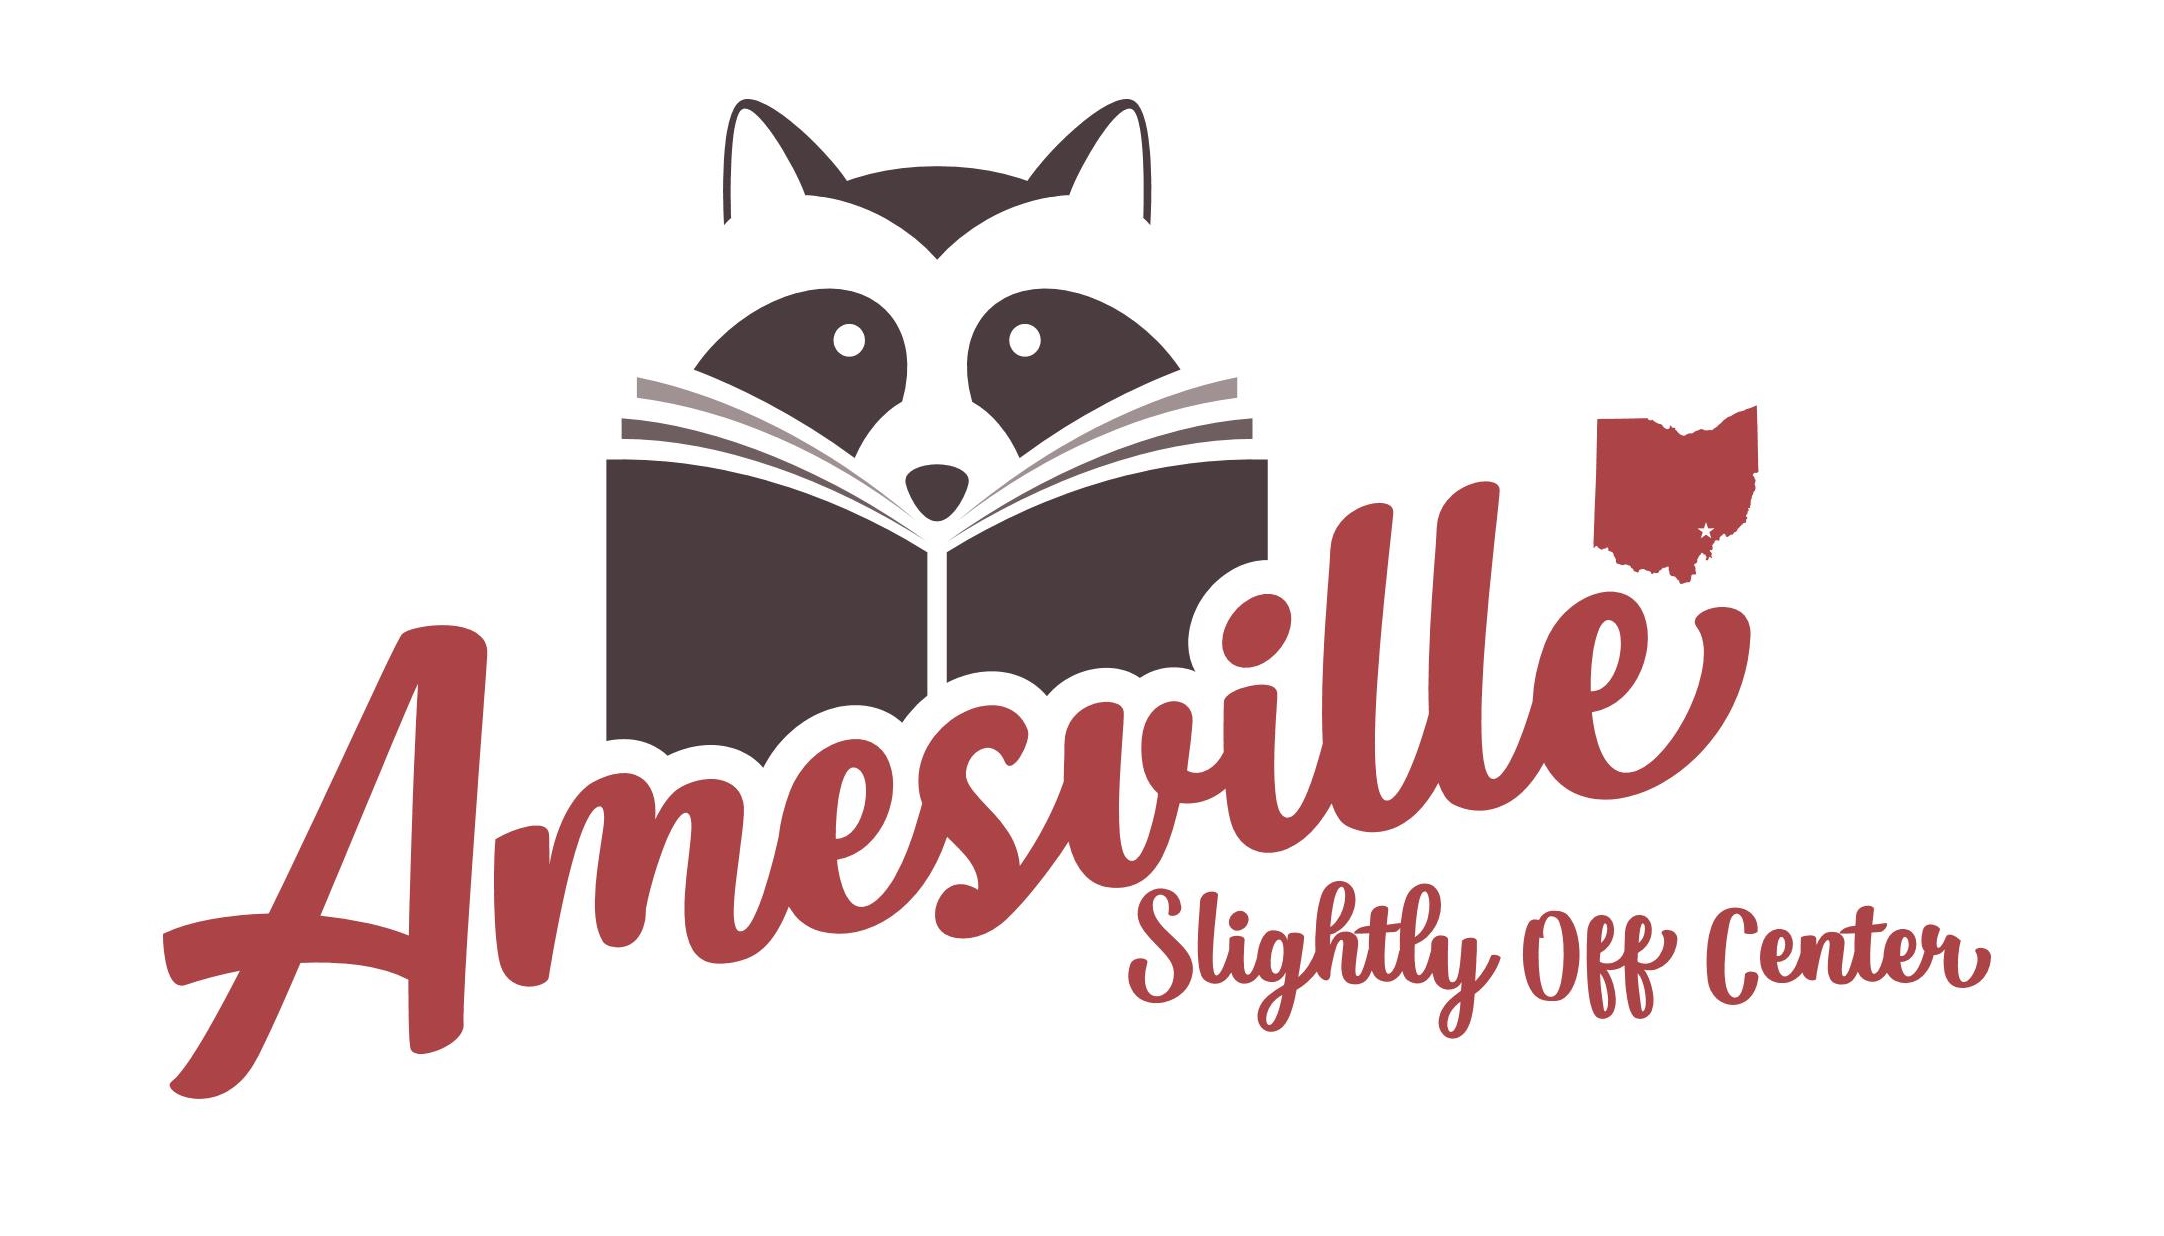 the logo for Amesville, which is an image of a raccoon reading a book over text that reads: "Amesville Slightly Off Center."